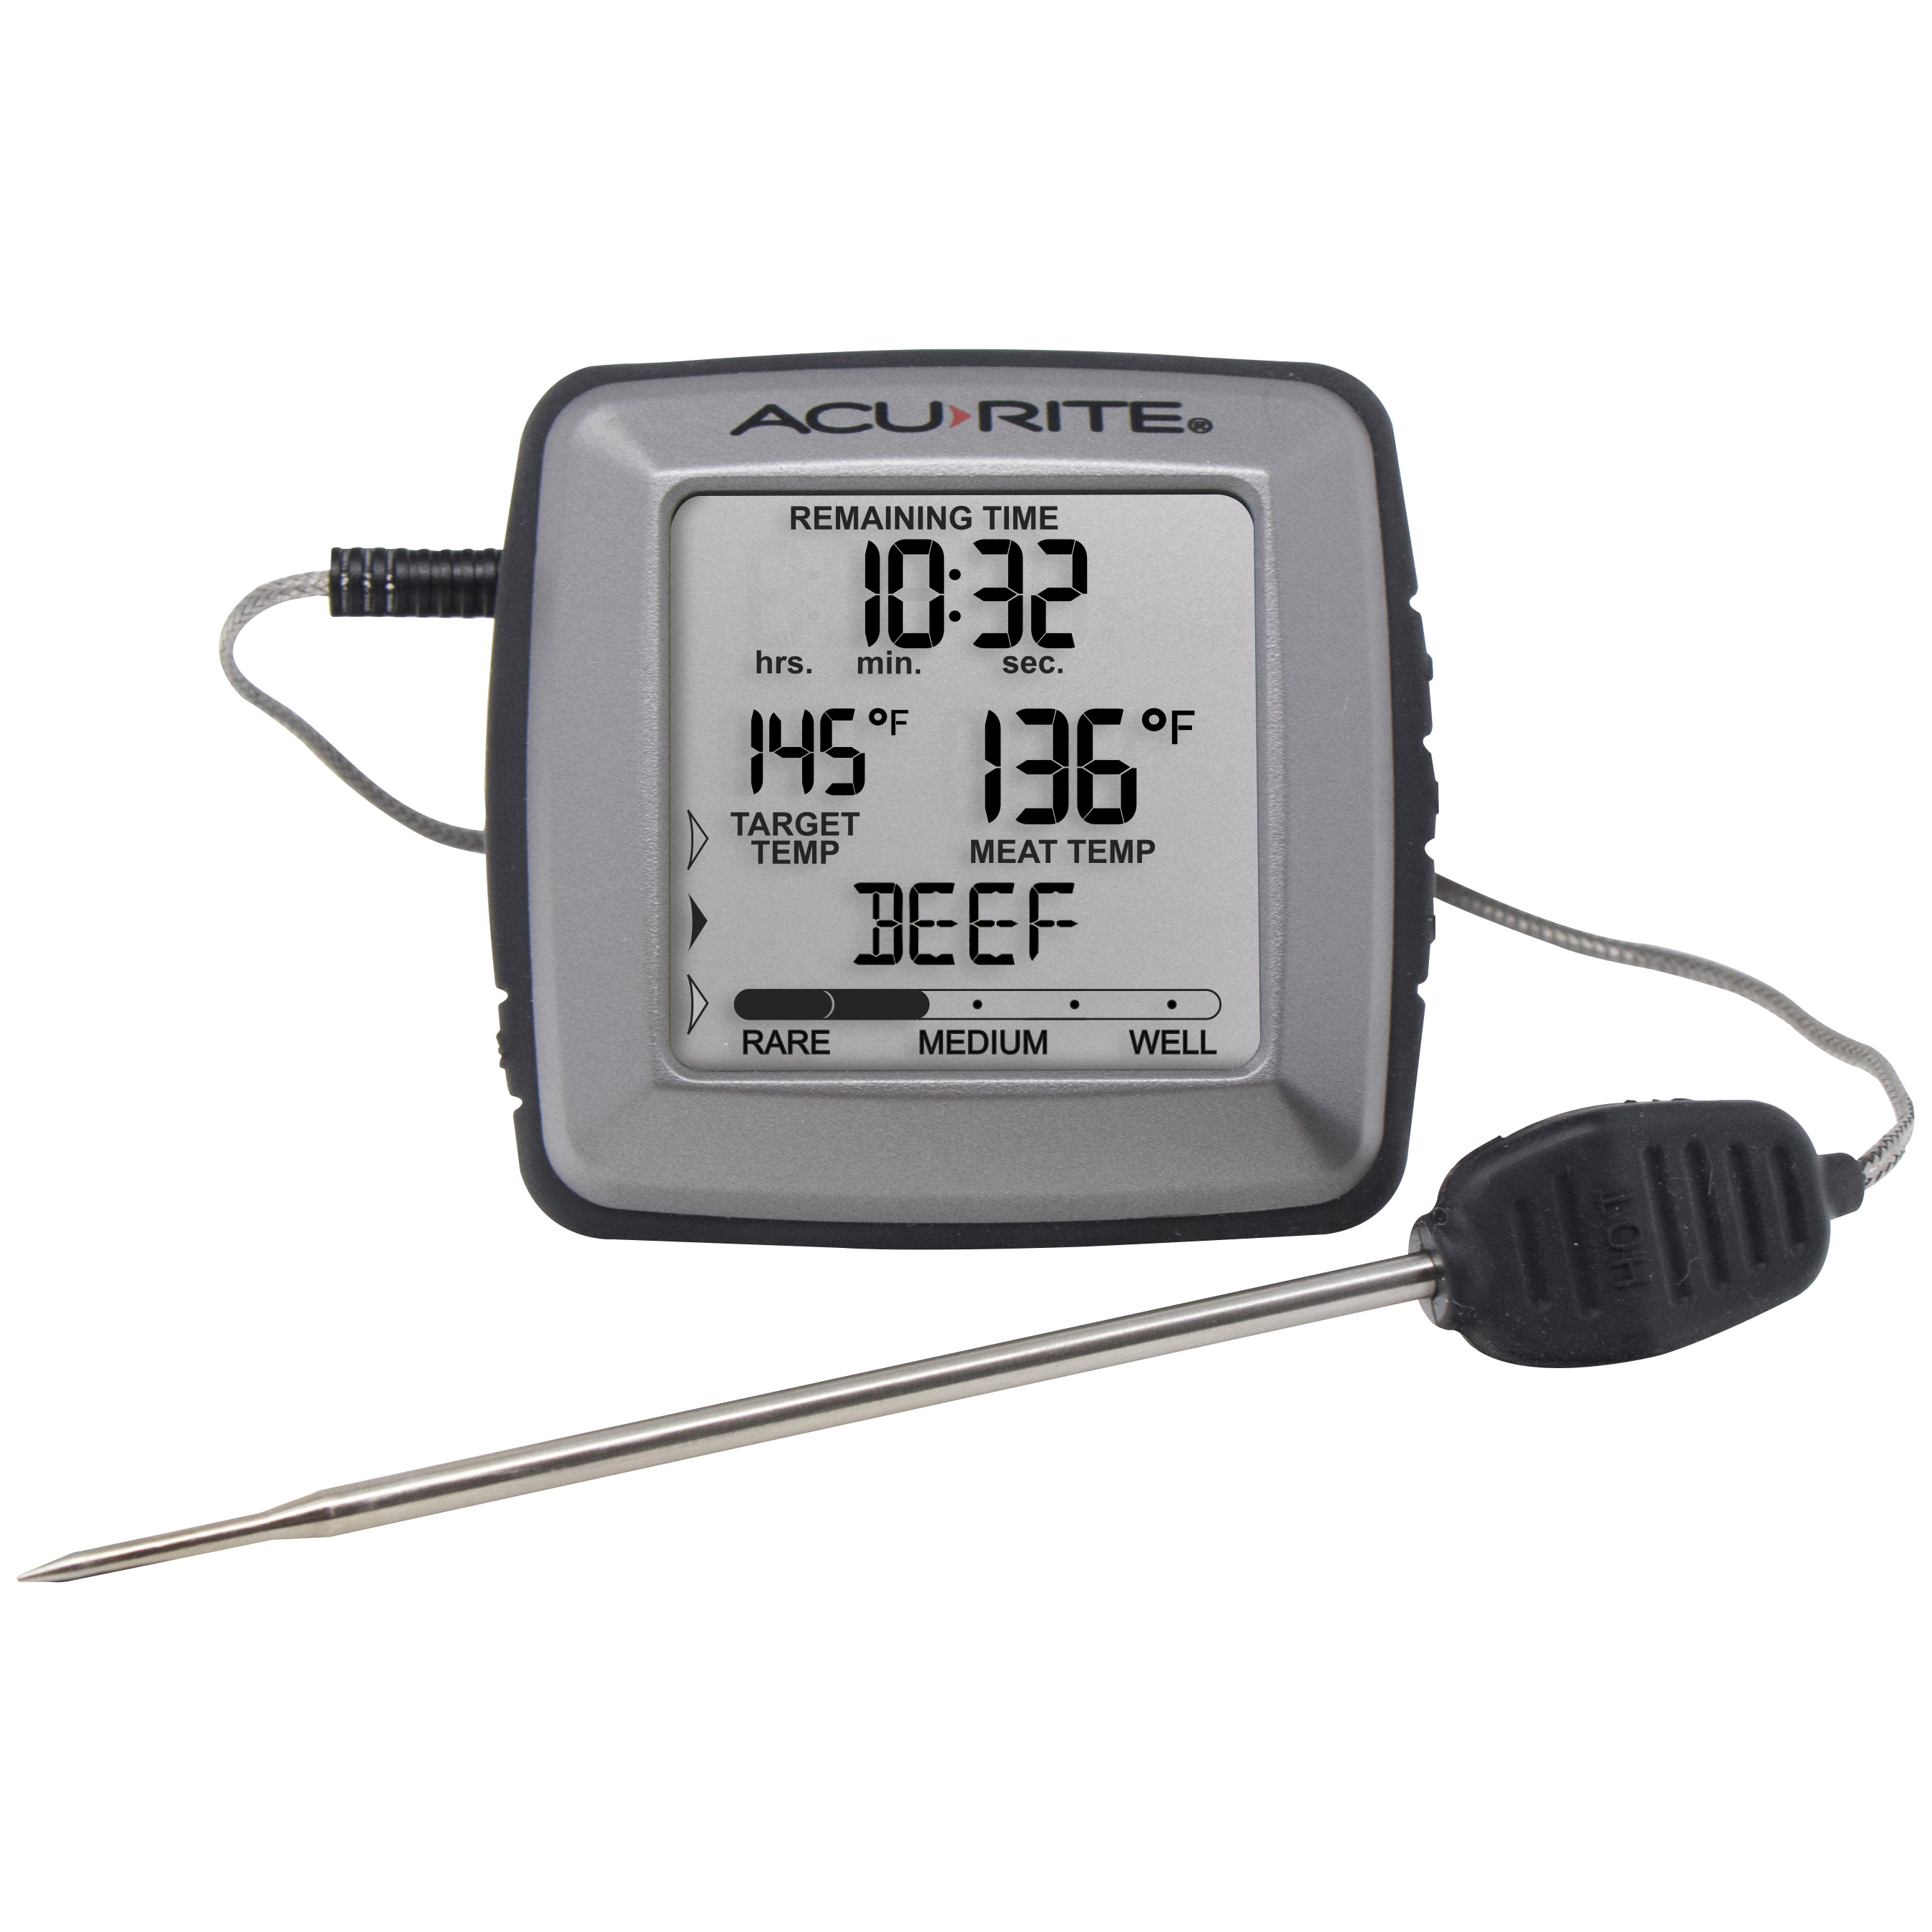 Digital Meat thermometer with Time Left to Cook